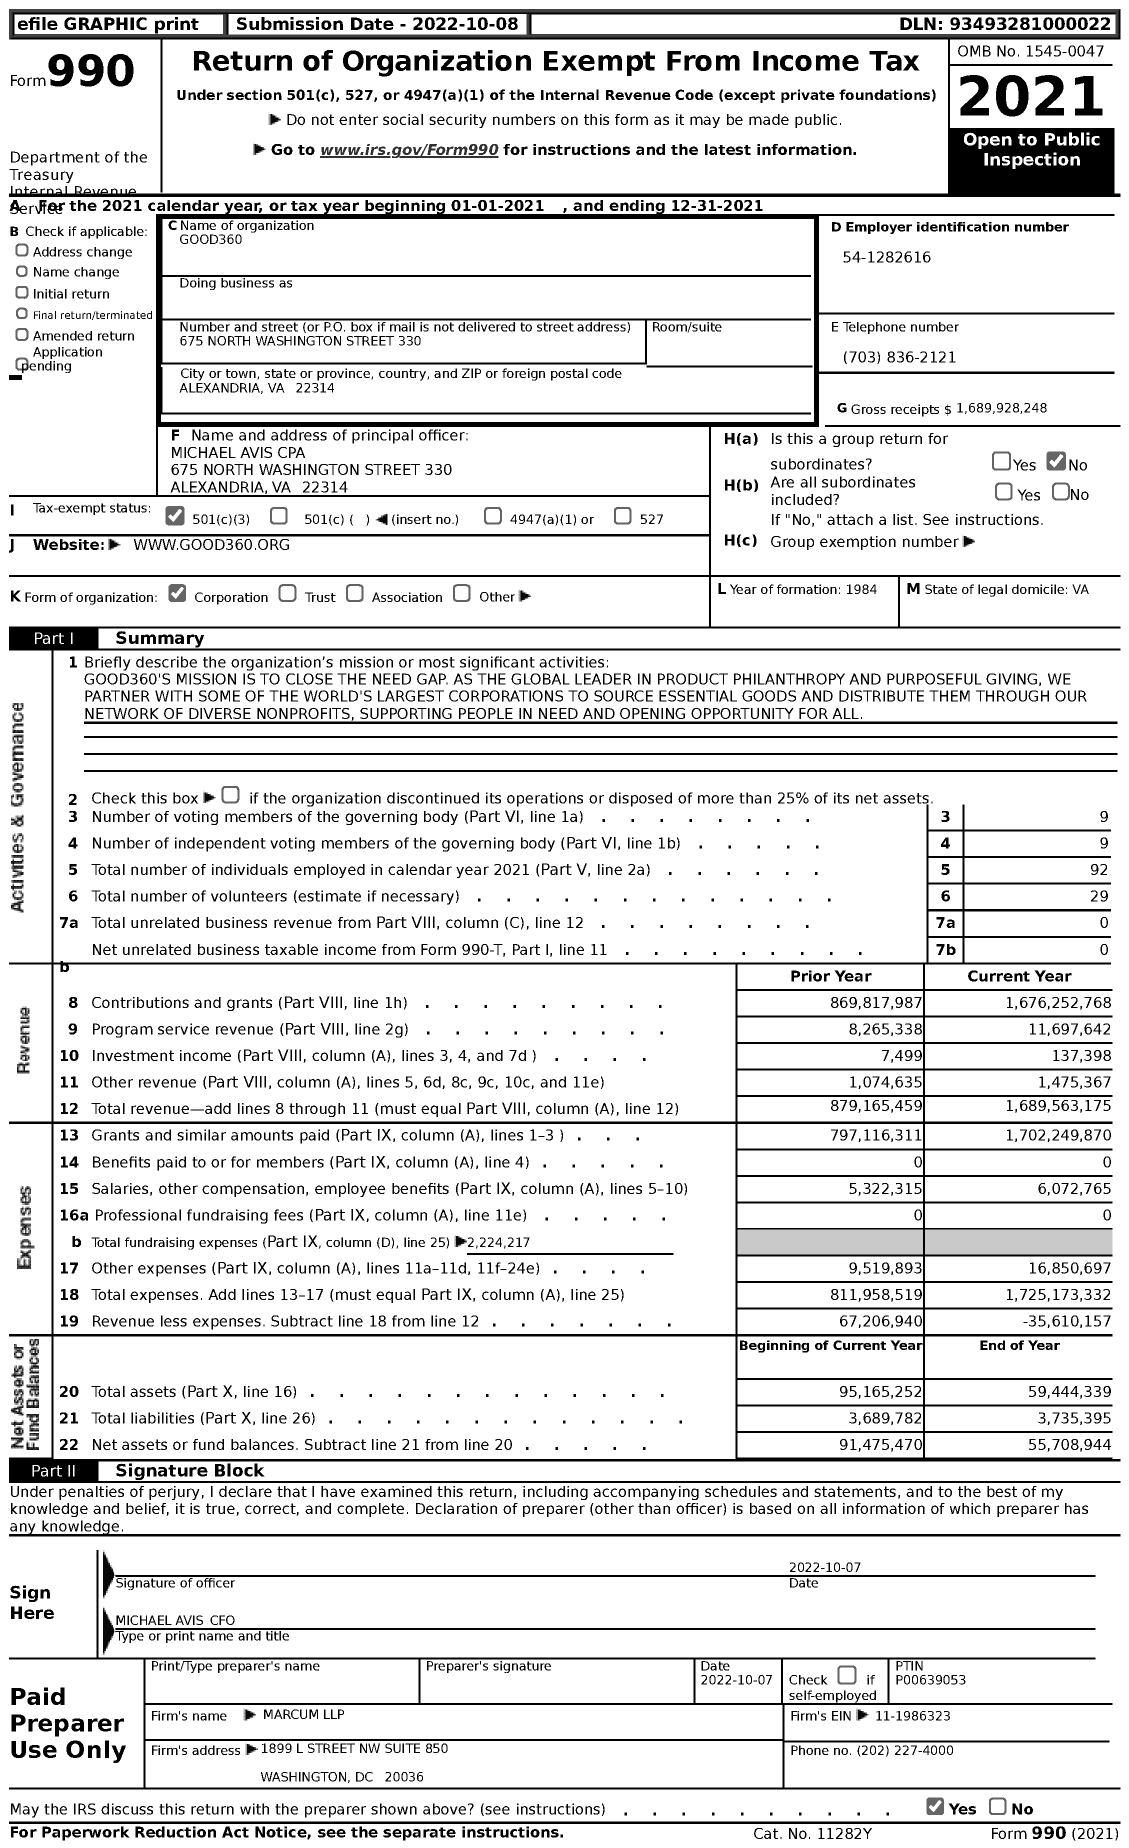 Image of first page of 2021 Form 990 for Good360